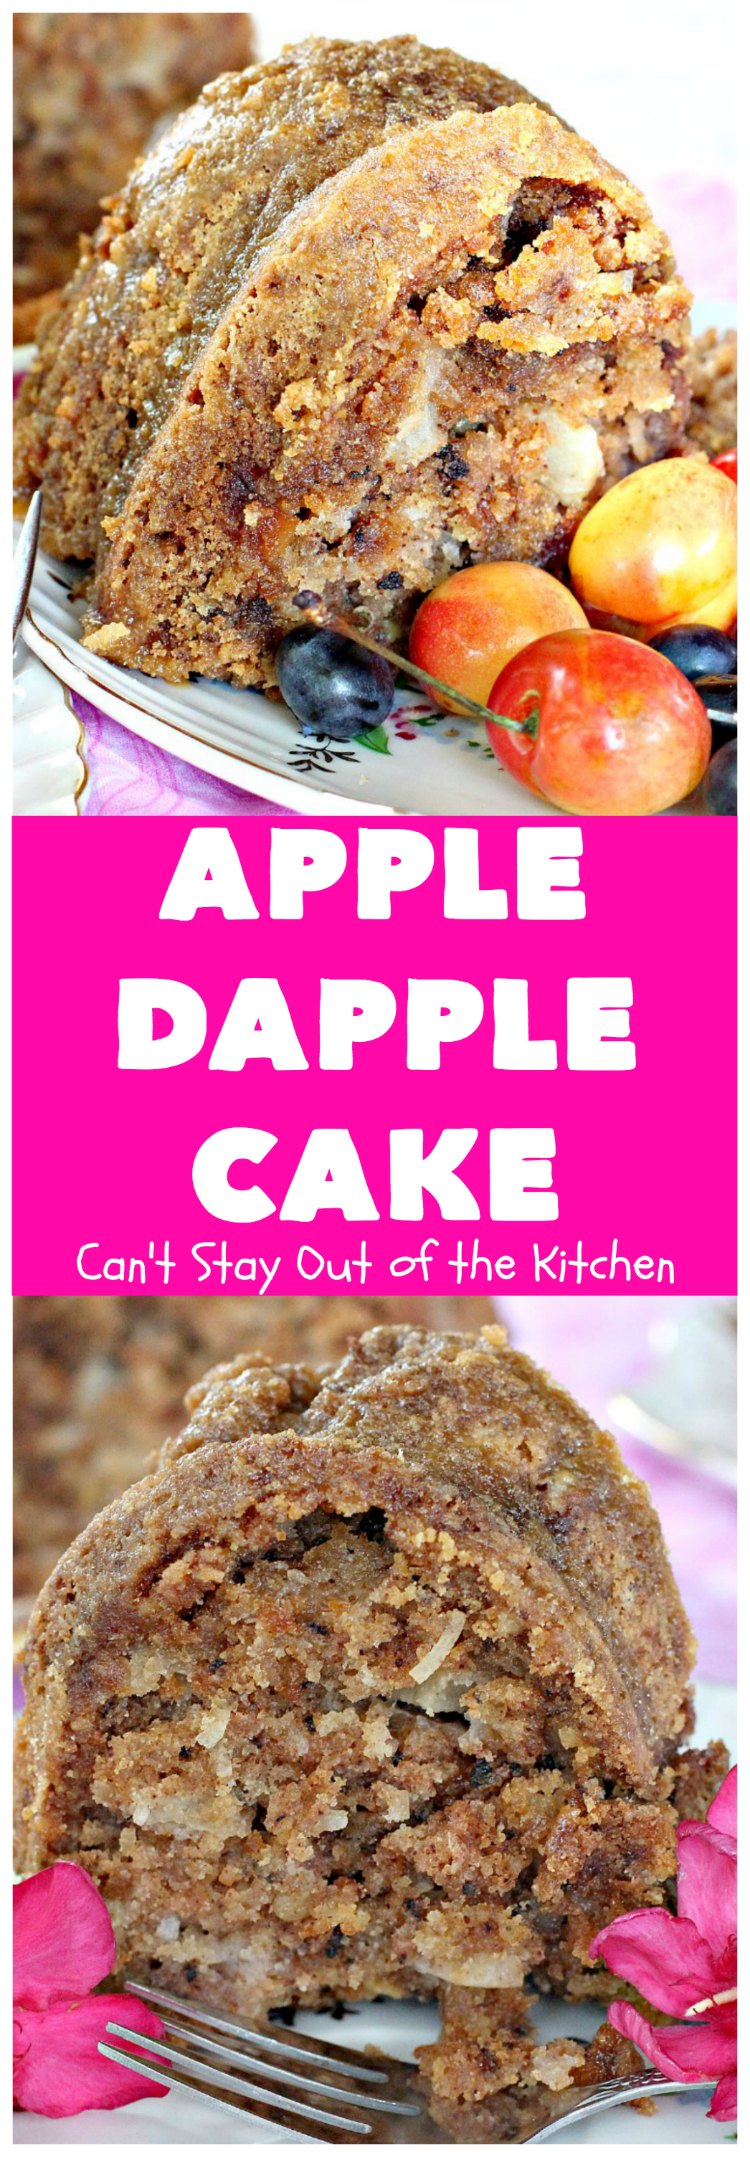 Apple Dapple Cake | Can't Stay Out of the Kitchen